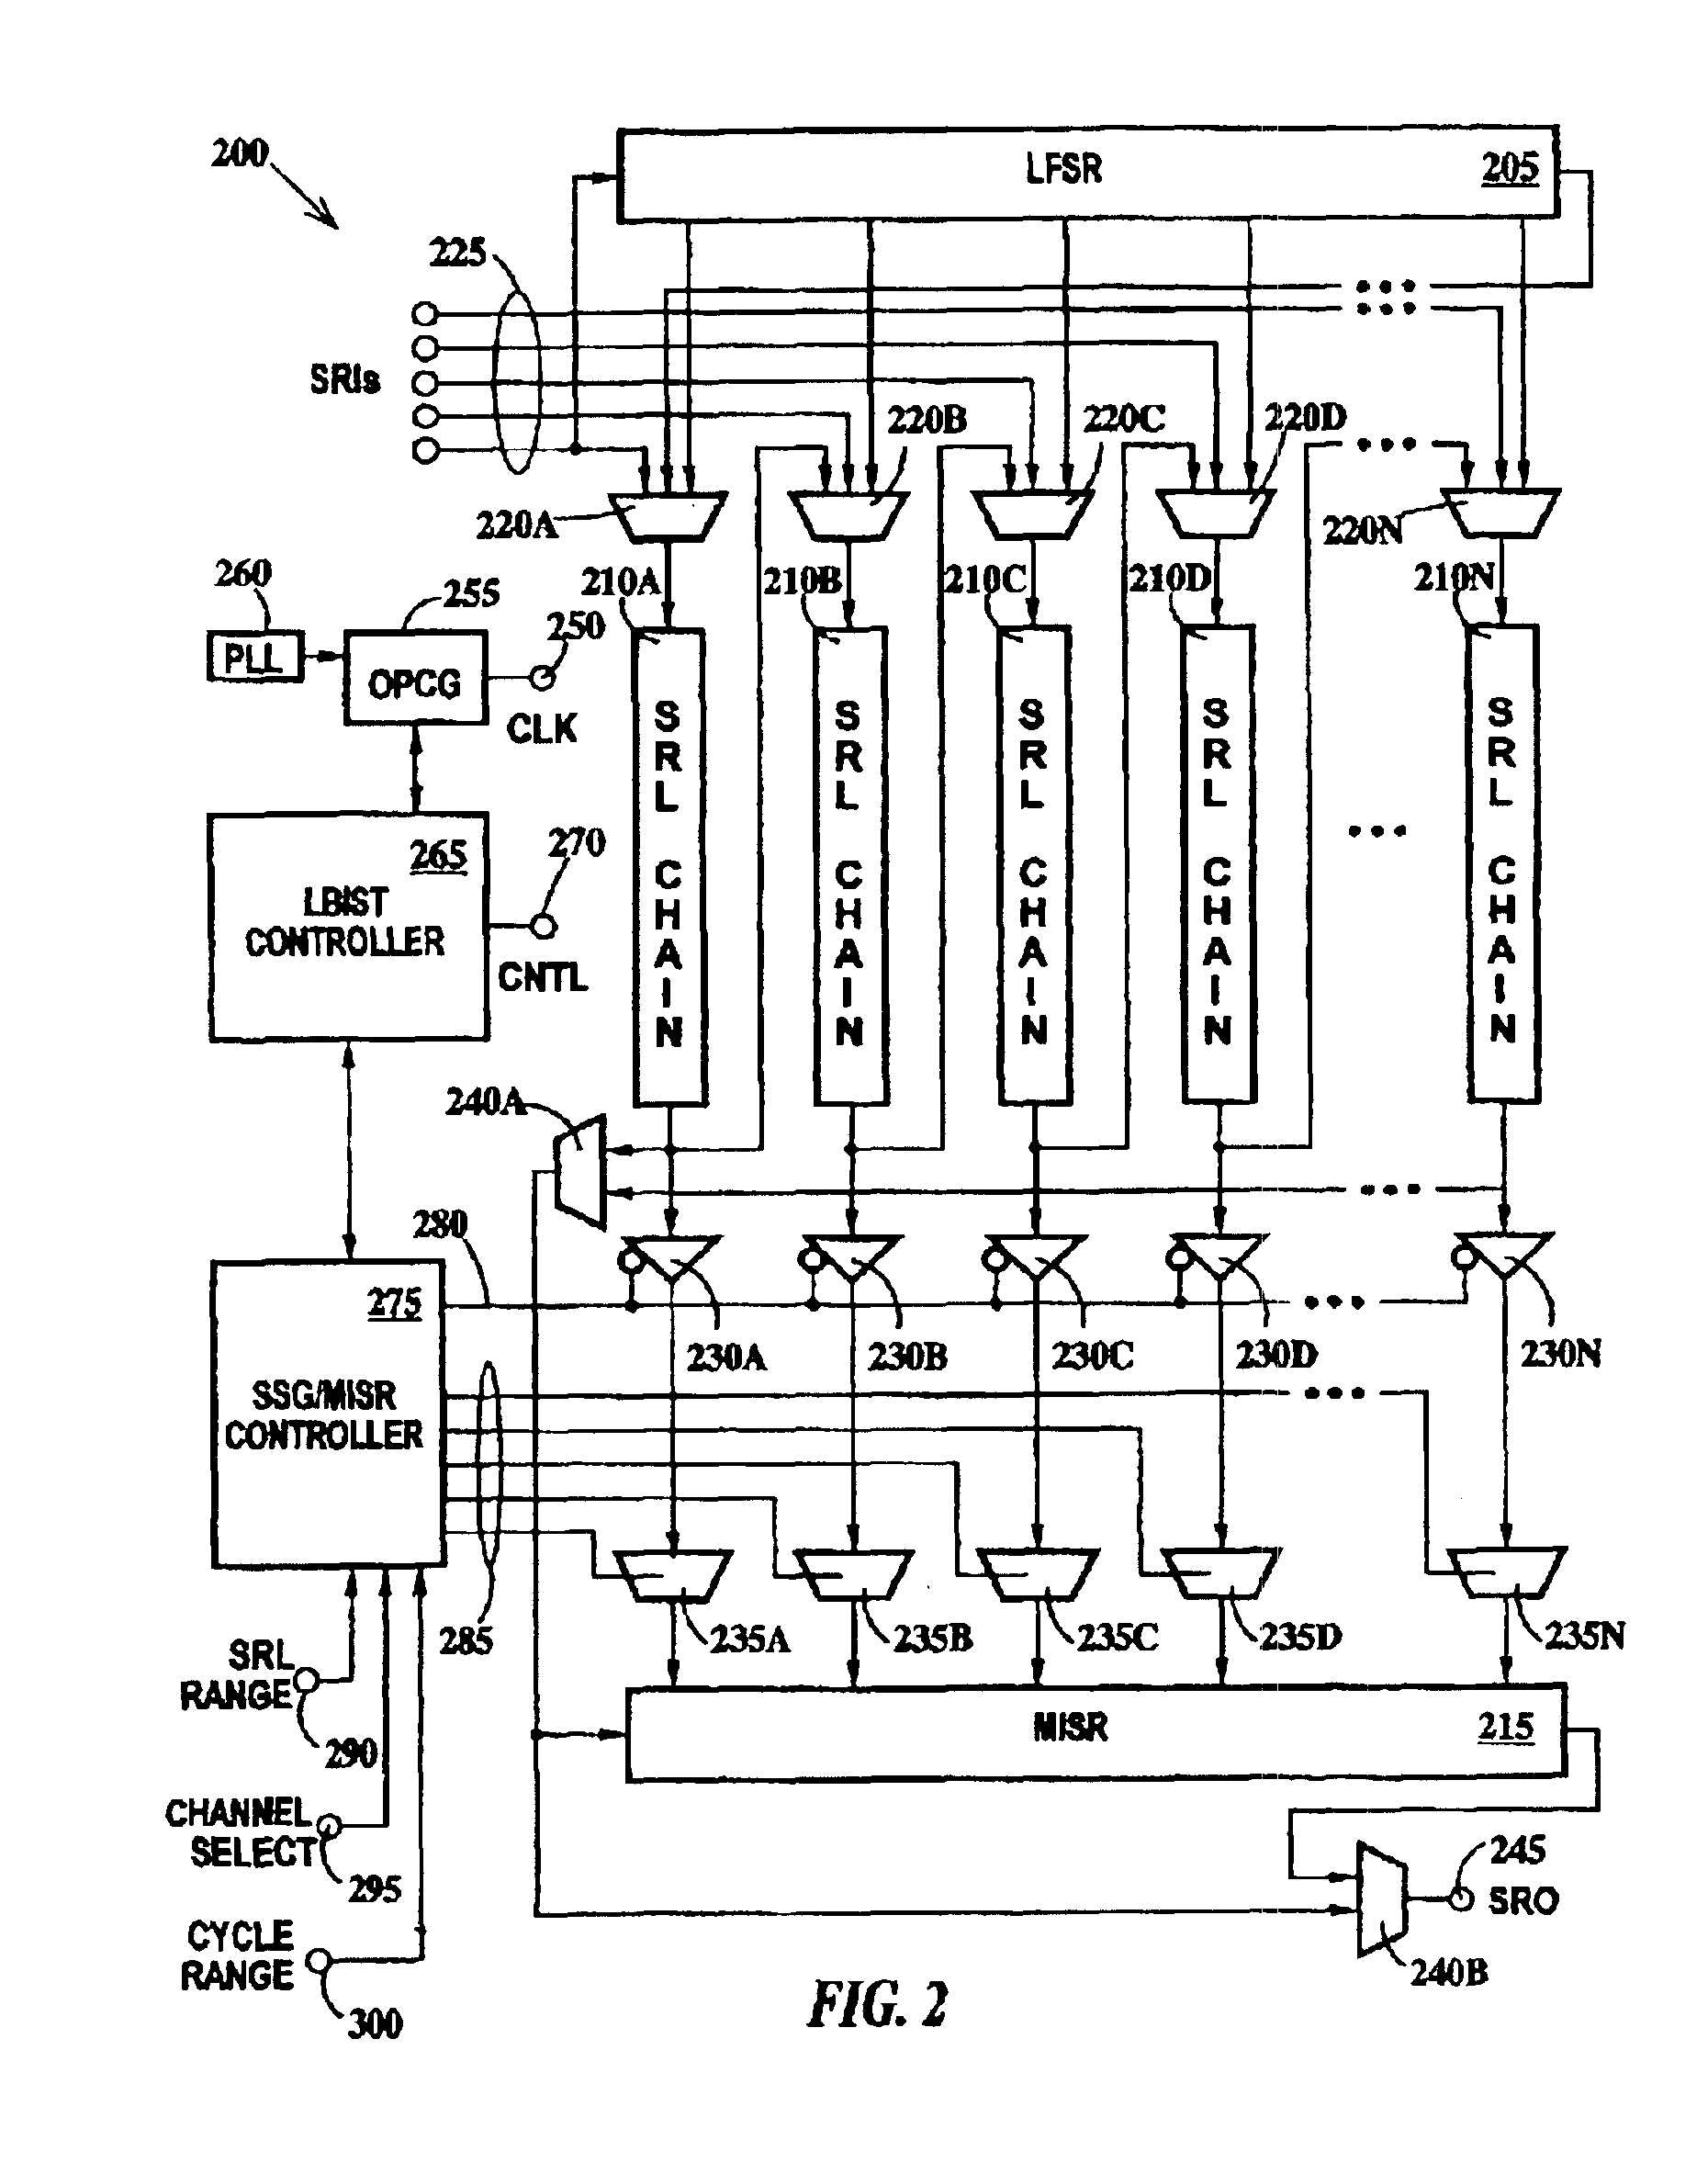 Diagnostic method for structural scan chain designs